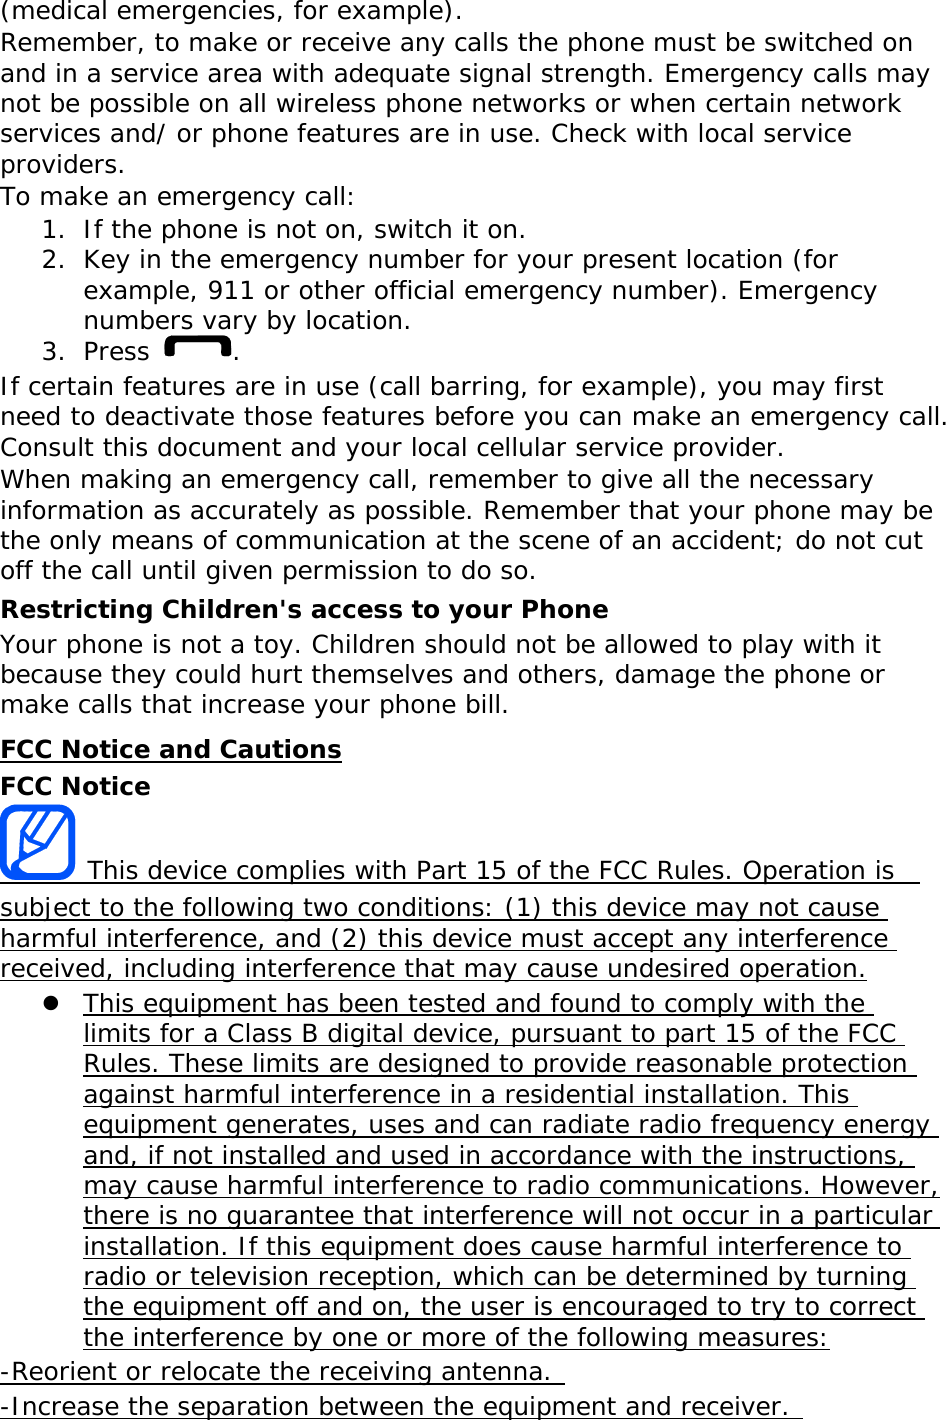 (medical emergencies, for example). Remember, to make or receive any calls the phone must be switched on and in a service area with adequate signal strength. Emergency calls may not be possible on all wireless phone networks or when certain network services and/ or phone features are in use. Check with local service providers. To make an emergency call: 1. If the phone is not on, switch it on. 2. Key in the emergency number for your present location (for example, 911 or other official emergency number). Emergency numbers vary by location. 3. Press  . If certain features are in use (call barring, for example), you may first need to deactivate those features before you can make an emergency call. Consult this document and your local cellular service provider. When making an emergency call, remember to give all the necessary information as accurately as possible. Remember that your phone may be the only means of communication at the scene of an accident; do not cut off the call until given permission to do so. Restricting Children&apos;s access to your Phone Your phone is not a toy. Children should not be allowed to play with it because they could hurt themselves and others, damage the phone or make calls that increase your phone bill. UFCC Notice and Cautions FCC Notice U This device complies with Part 15 of the FCC Rules. Operation is  subject to the following two conditions: (1) this device may not cause harmful interference, and (2) this device must accept any interference received, including interference that may cause undesired operation. z UThis equipment has been tested and found to comply with the limits for a Class B digital device, pursuant to part 15 of the FCC Rules. These limits are designed to provide reasonable protection against harmful interference in a residential installation. This equipment generates, uses and can radiate radio frequency energy and, if not installed and used in accordance with the instructions, may cause harmful interference to radio communications. However, there is no guarantee that interference will not occur in a particular installation. If this equipment does cause harmful interference to radio or television reception, which can be determined by turning the equipment off and on, the user is encouraged to try to correct the interference by one or more of the following measures: U-Reorient or relocate the receiving antenna.  U-Increase the separation between the equipment and receiver.  